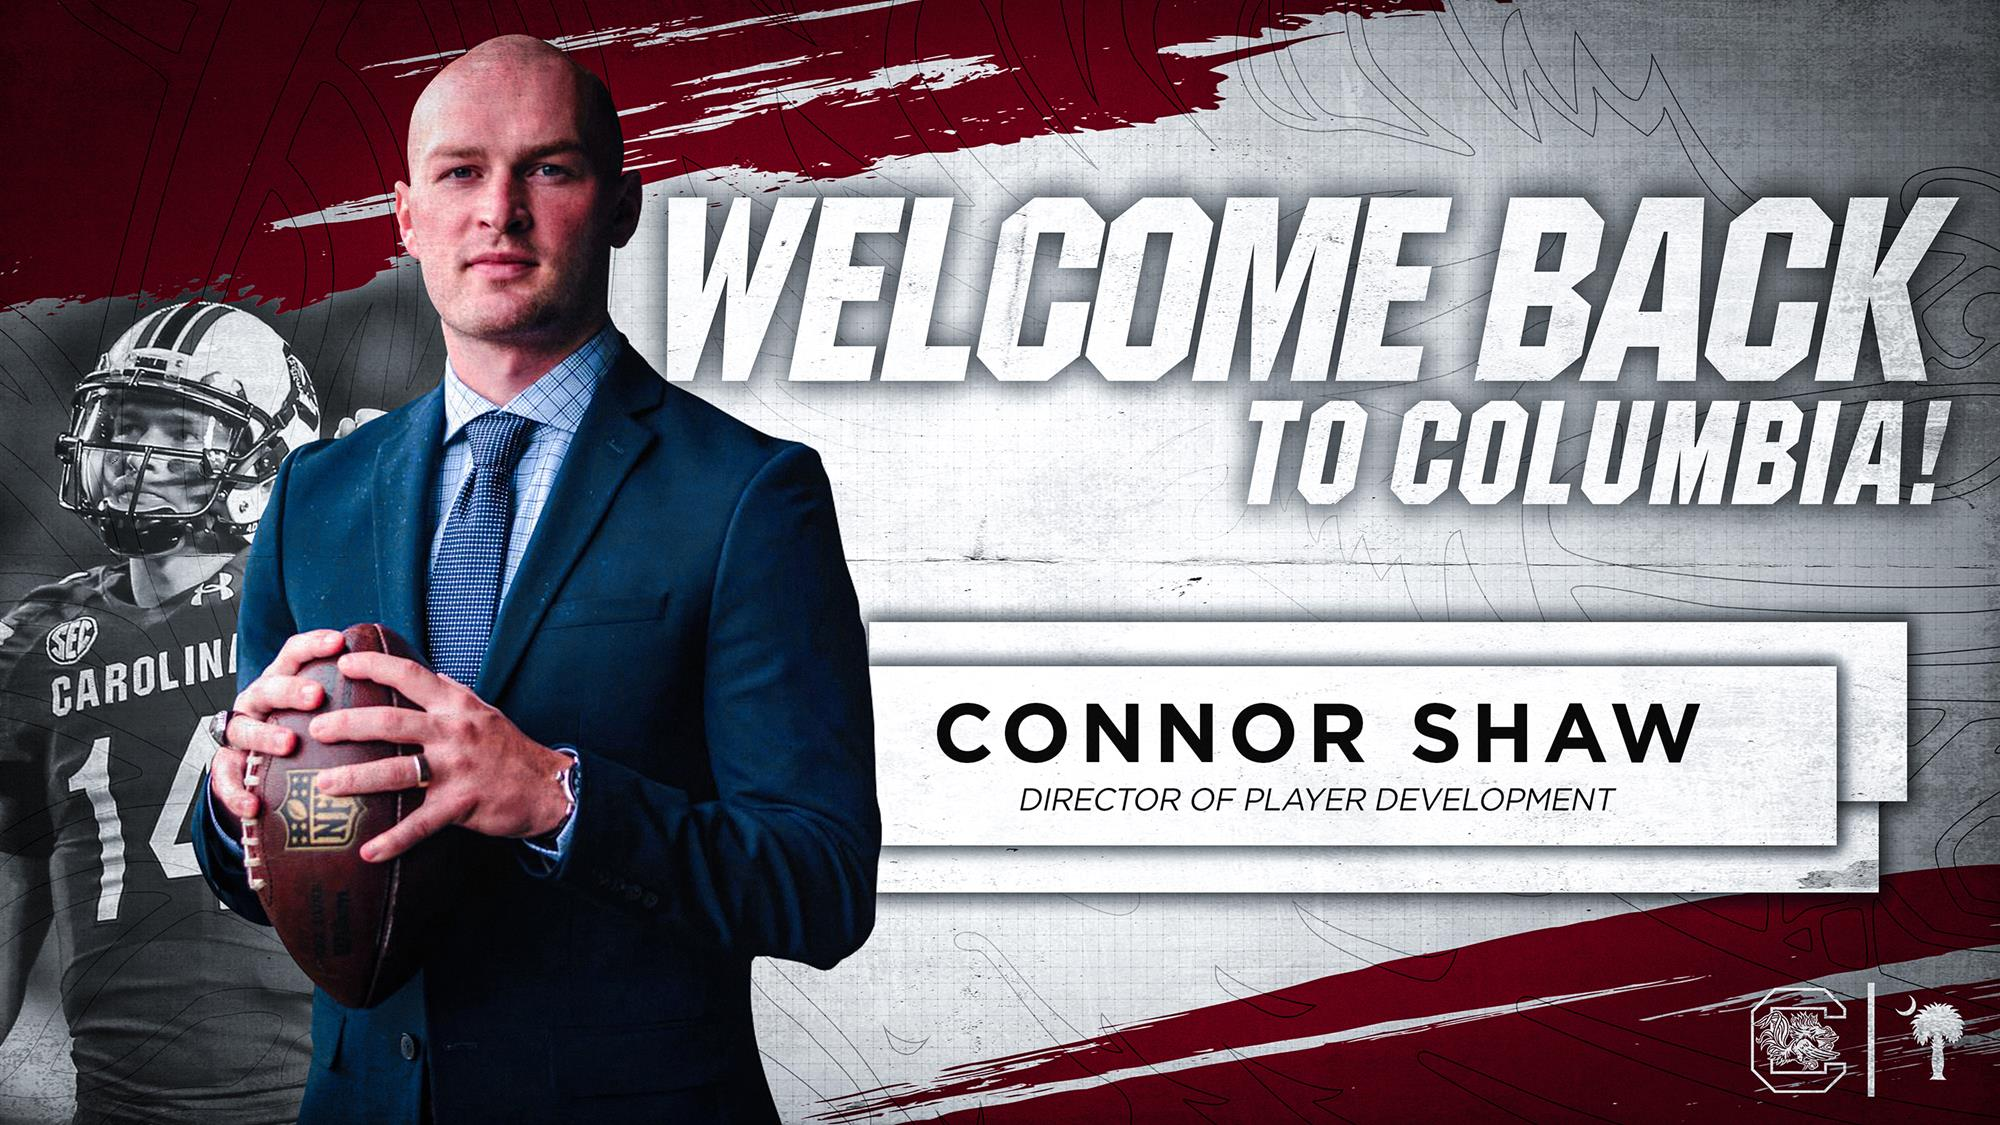 Connor Shaw Named Director of Player Development